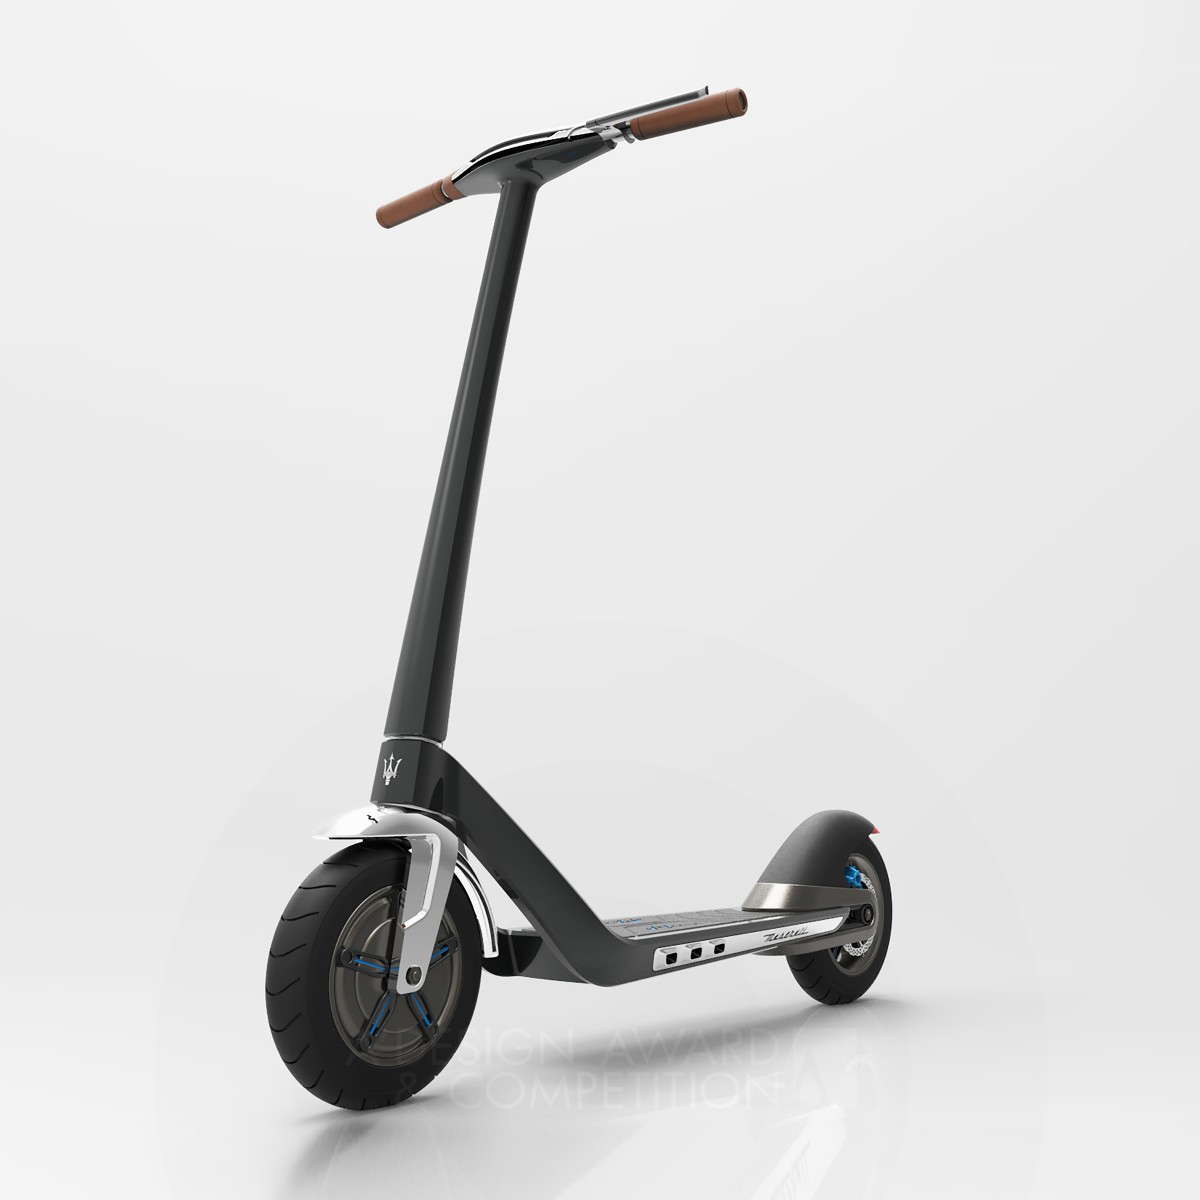 E Scooter Electric vehicle  by Diavelo Golden Vehicle, Mobility and Transportation Design Award Winner 2018 